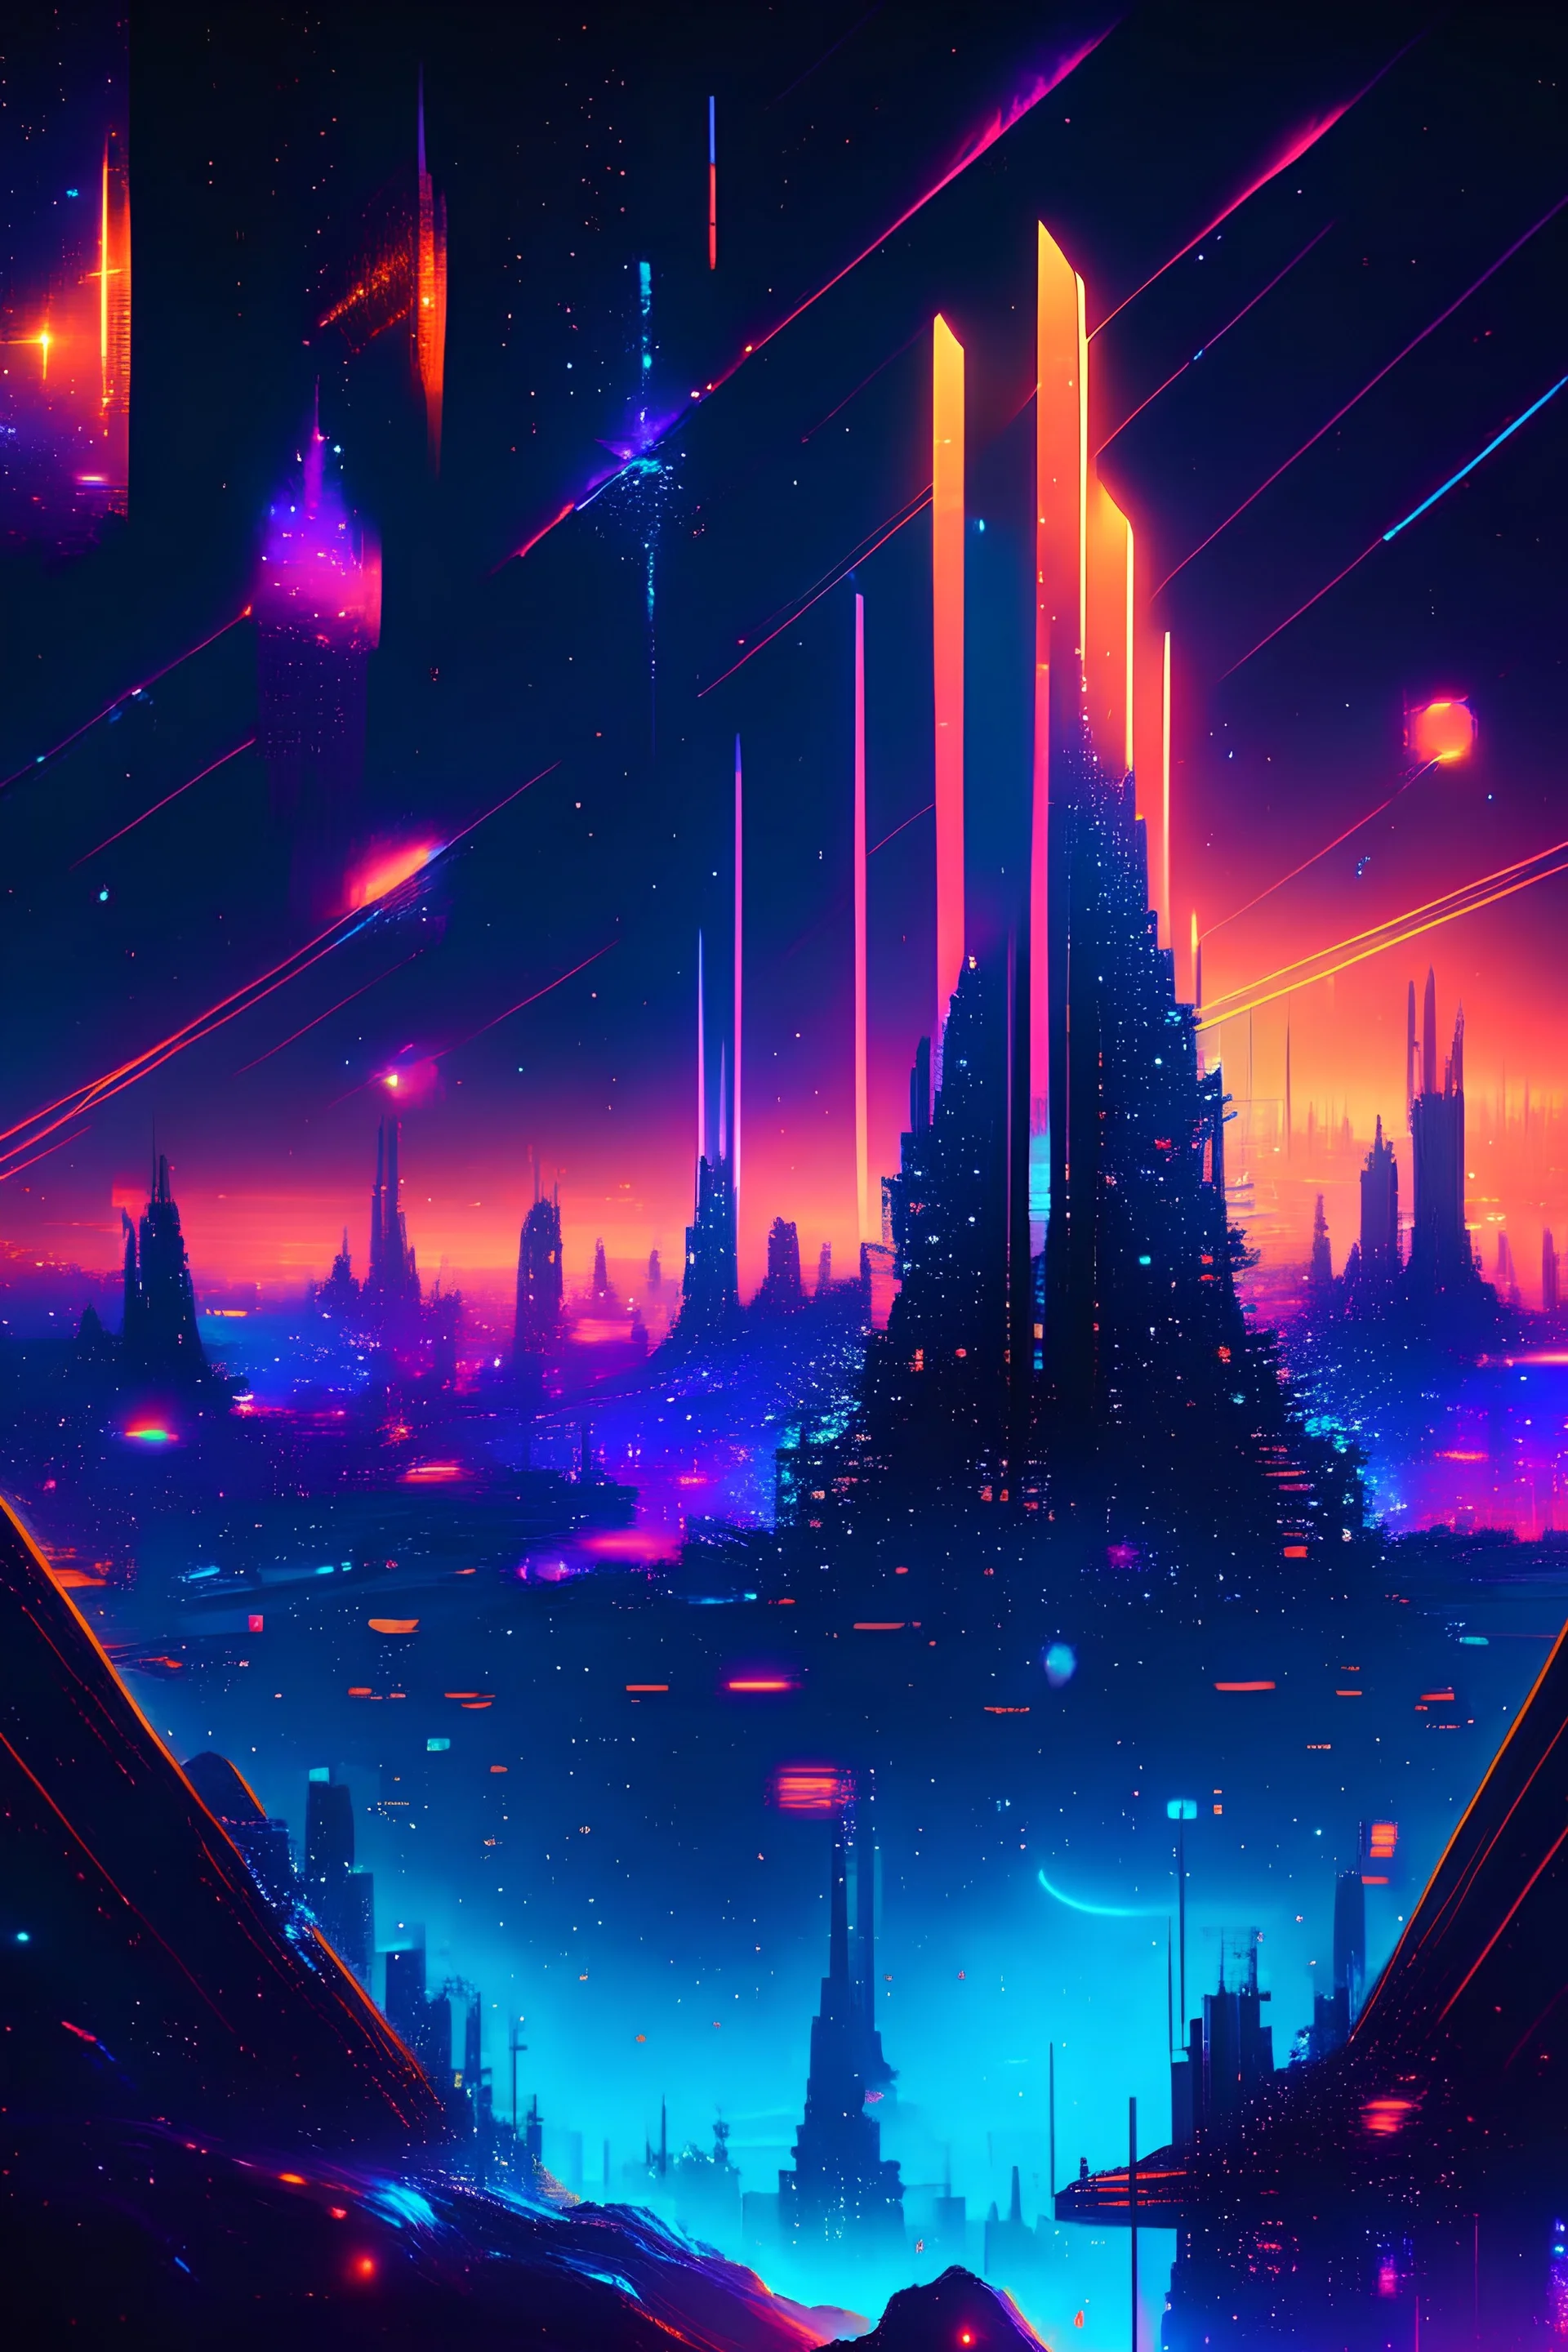 A sparkling city of glass and neon towers, hovering over a sea of stars, Cyberpunk, Digital Illustration